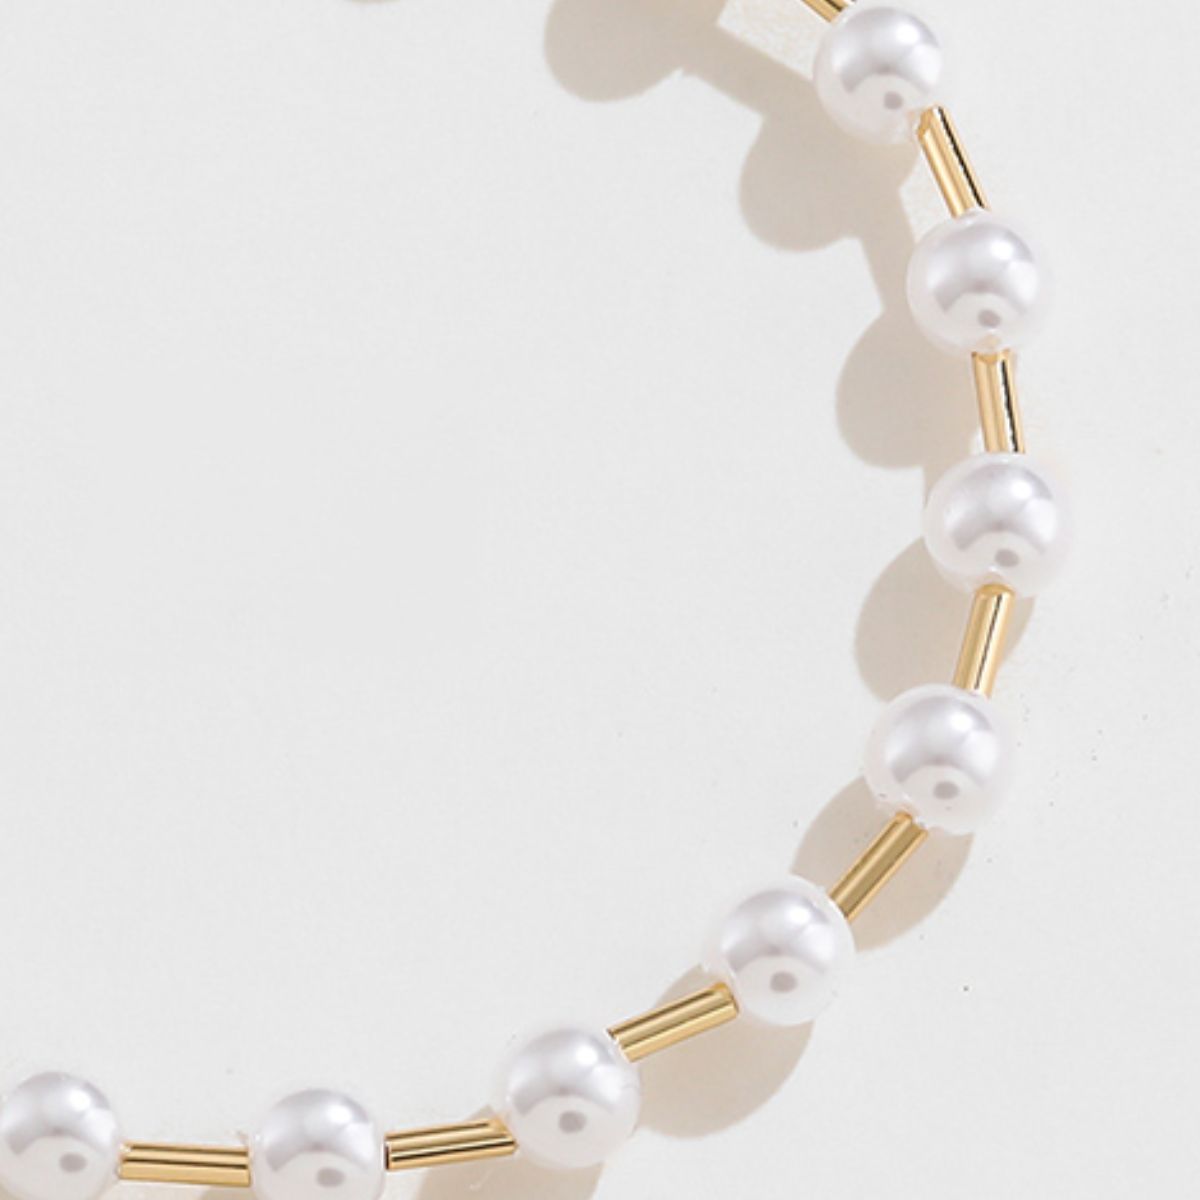 Gold-Plated Synthetic Pearl Bracelets